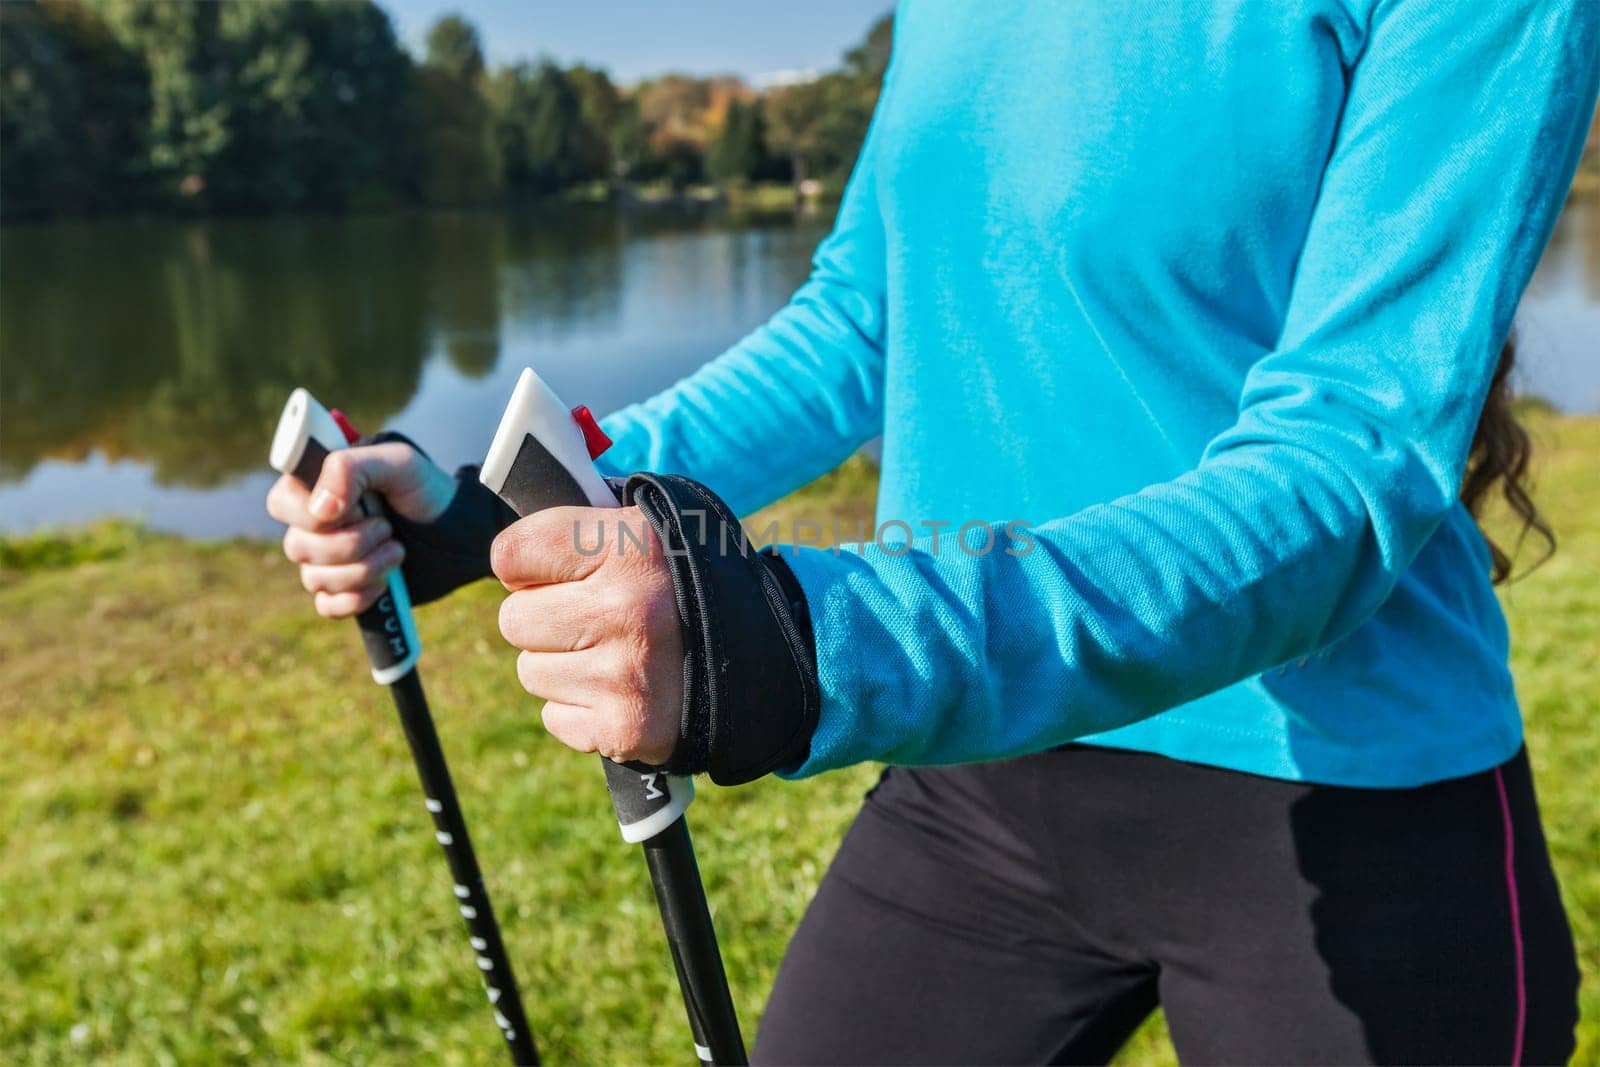 Nordic walking exercise adventure hiking concept - closeup of woman's hand holding nordic walking poles